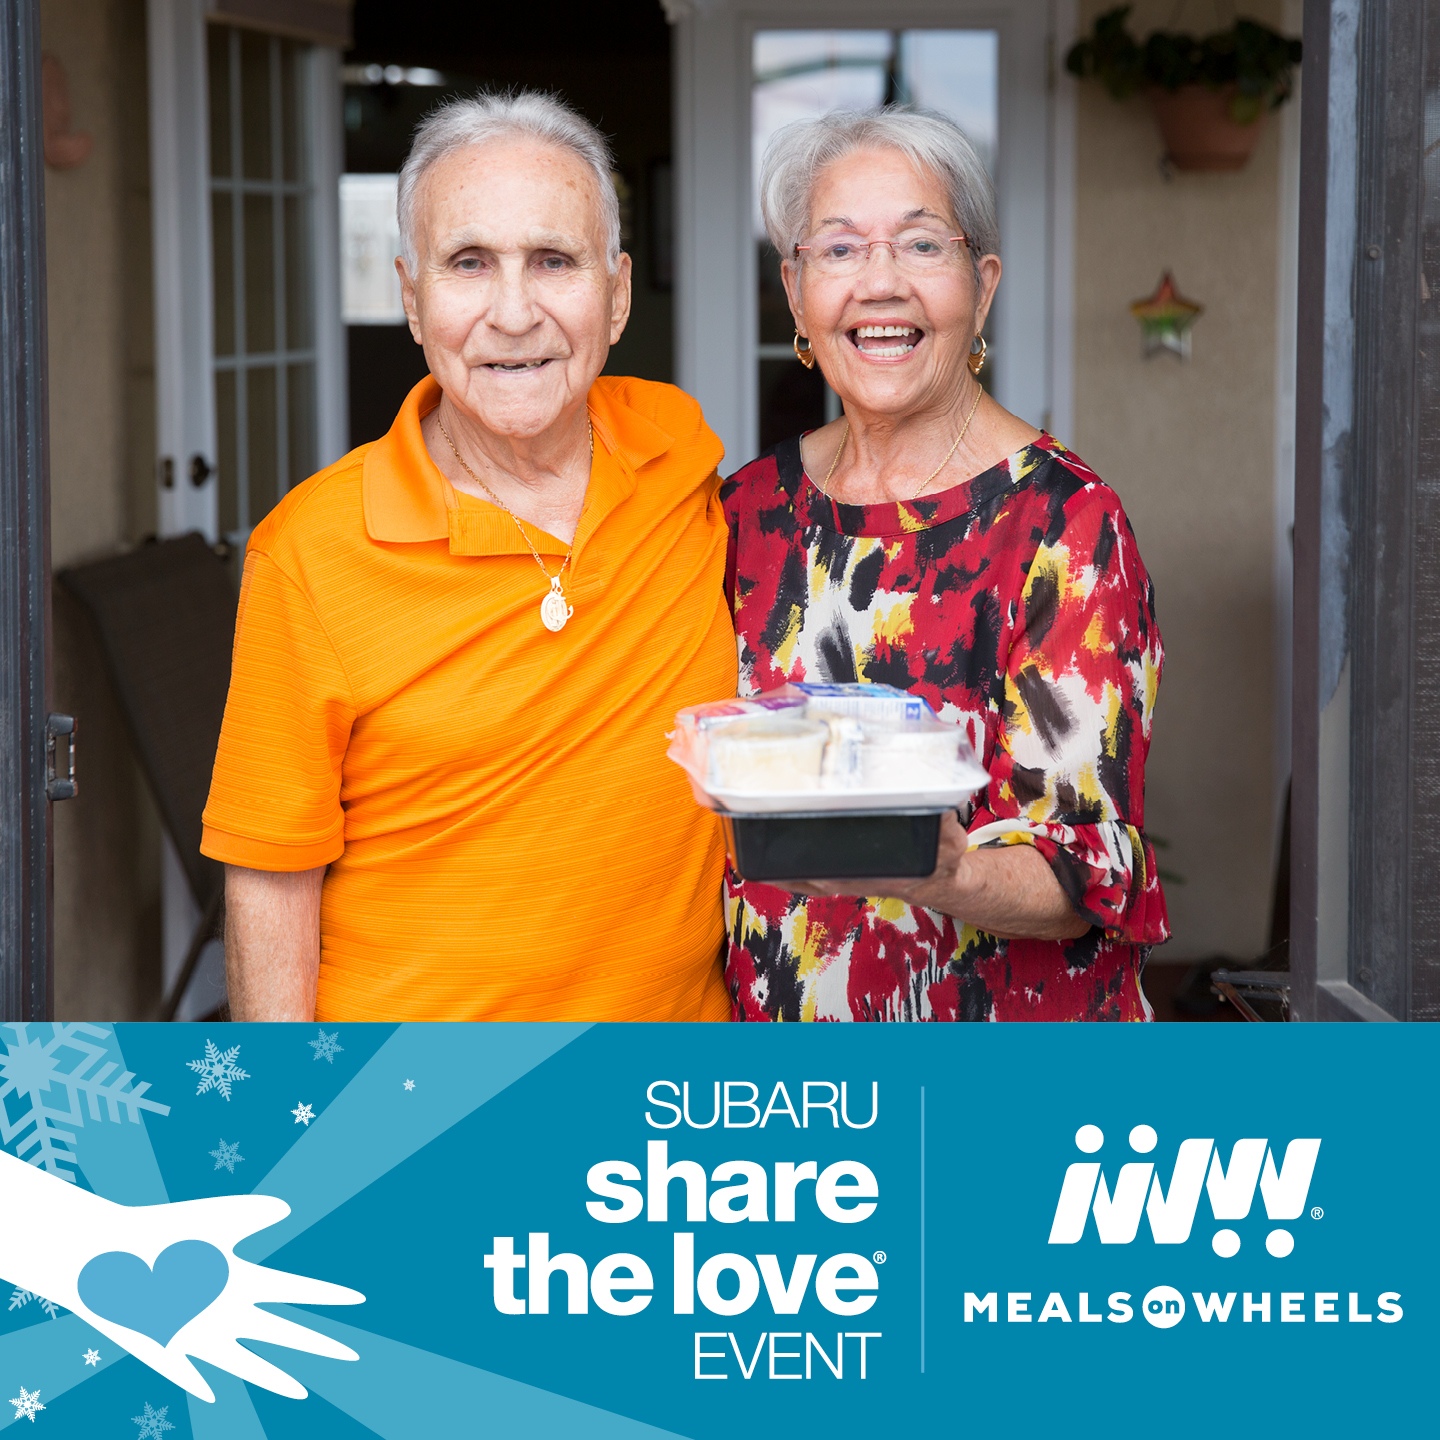 The Subaru share the love event with Meals on Wheels